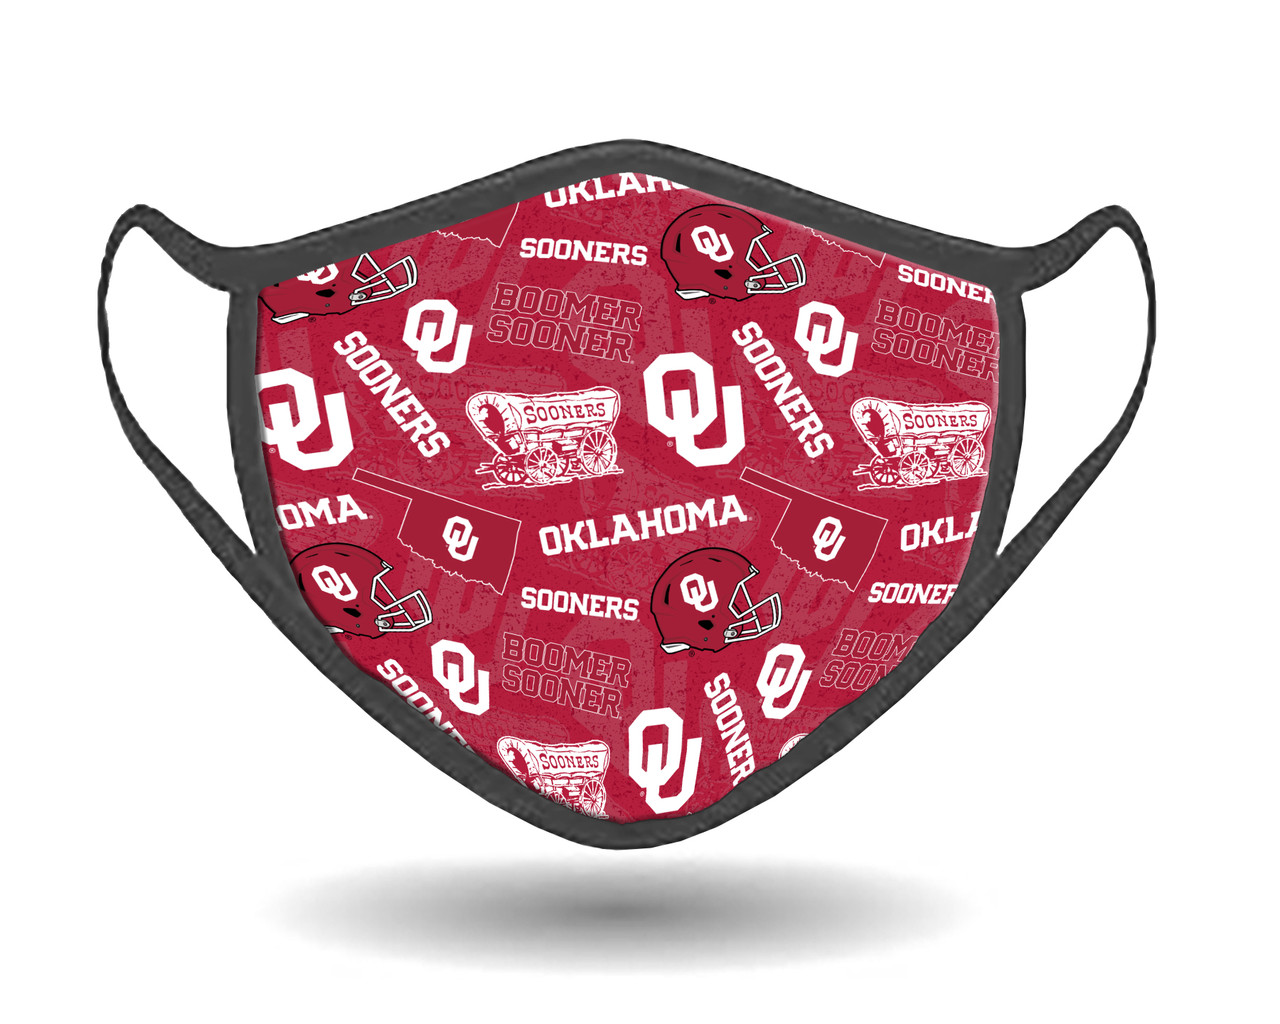 University of Oklahoma Face Mask with Anti-microbial & Probiotics-100% Cotton-Individually Packaged-Adjustable Earloop